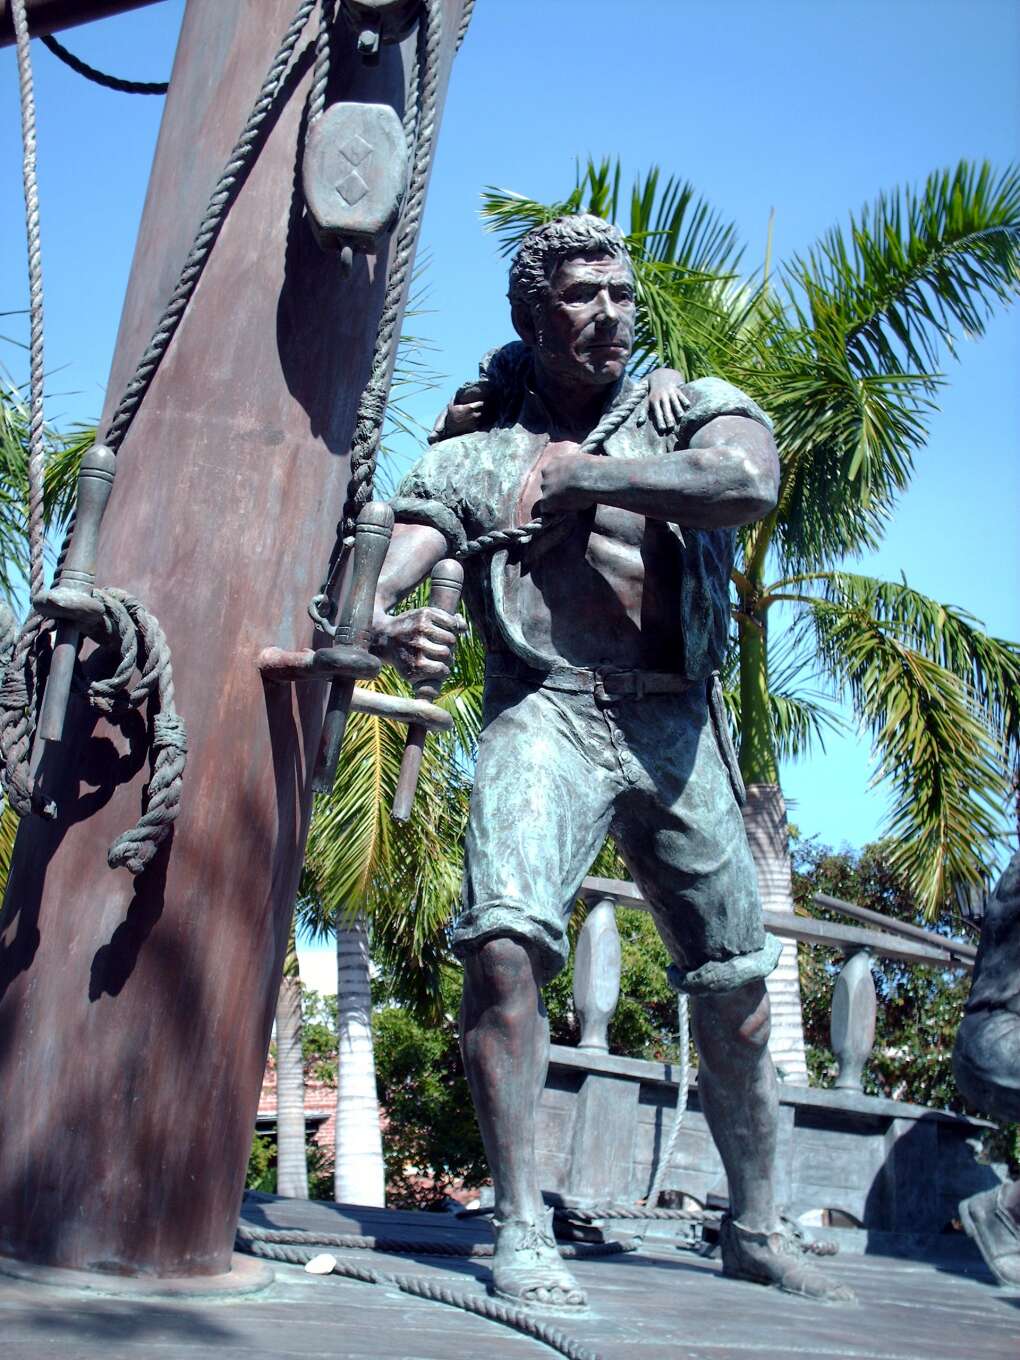 Check out this statue in old-town Key West!